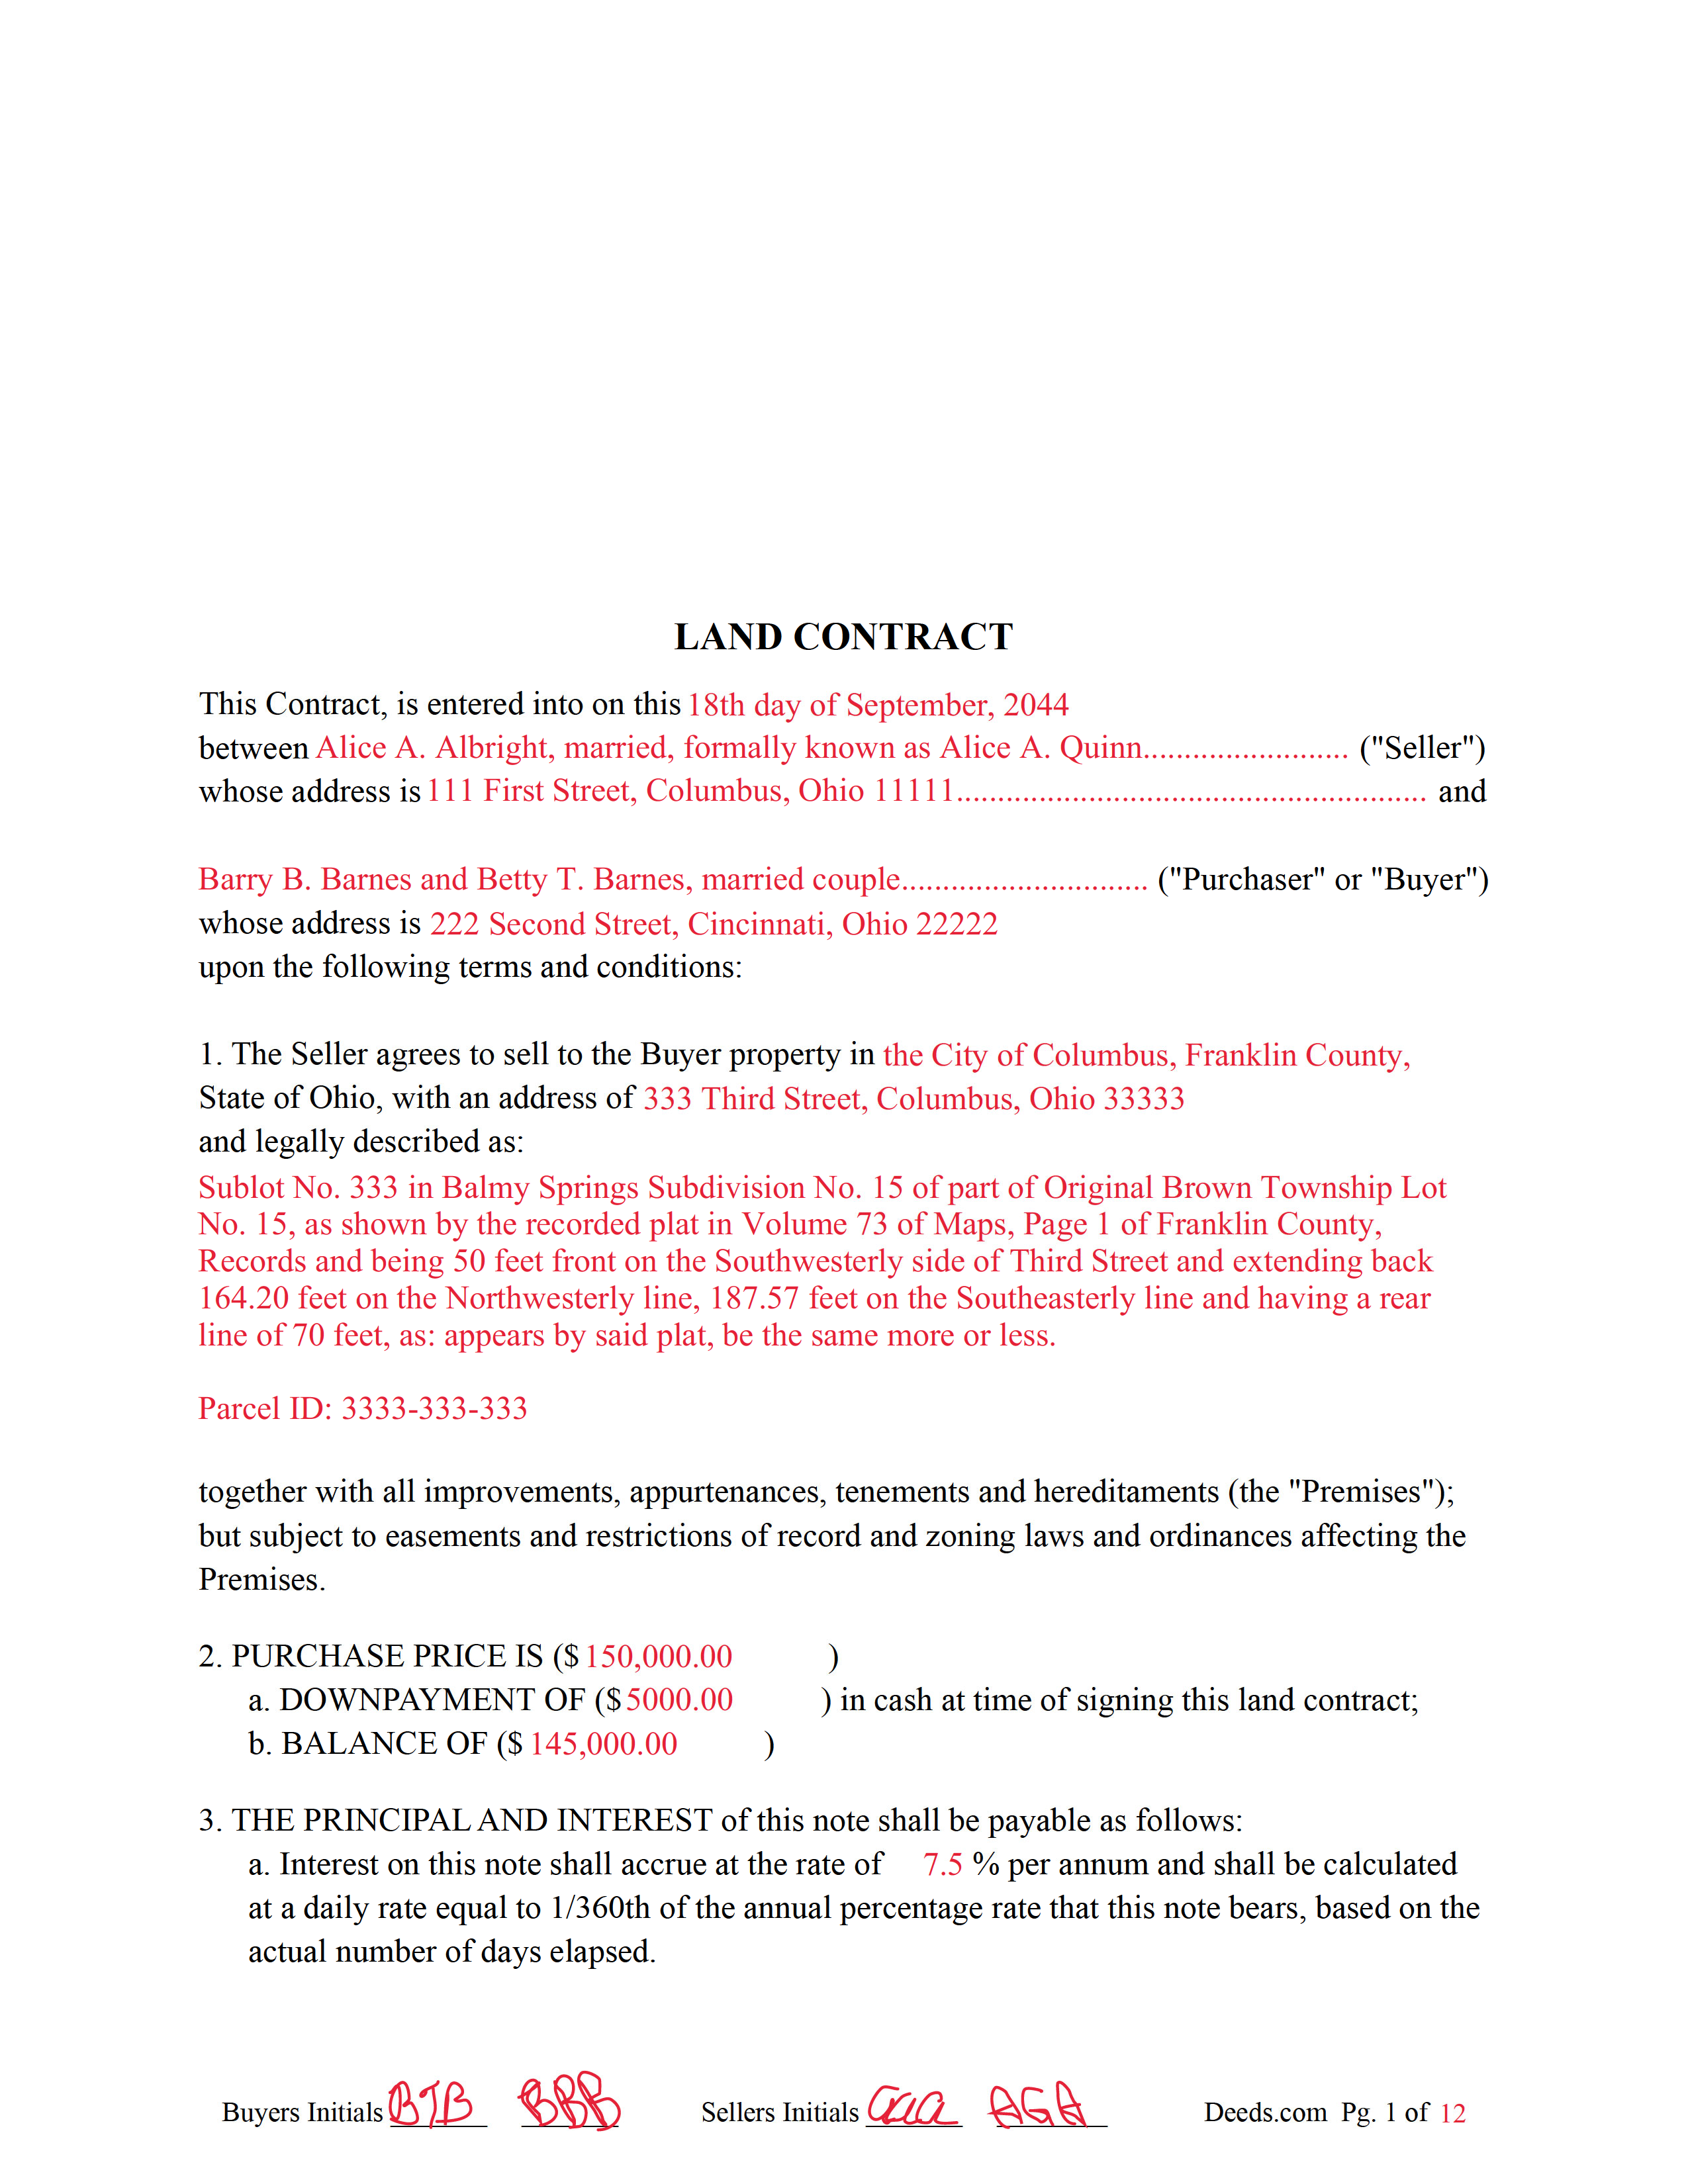 Guernsey County Completed Example of the Land Contract Document